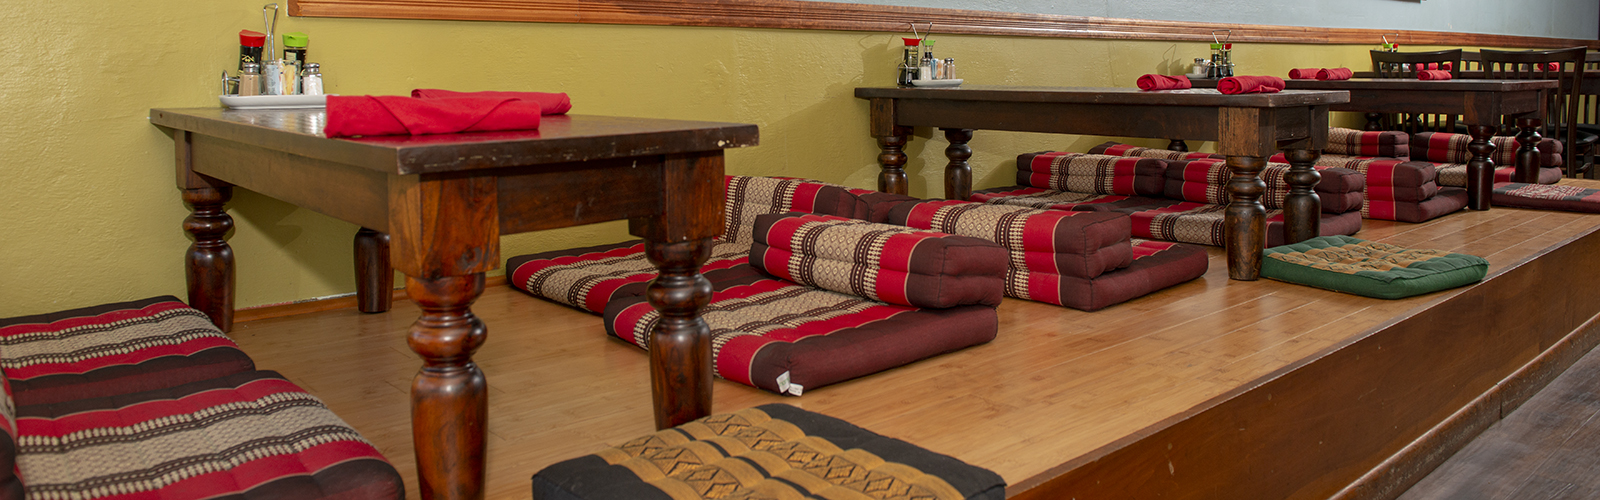 The interior at Ruthai's Thai Kitchen offers comfortable floor seating.